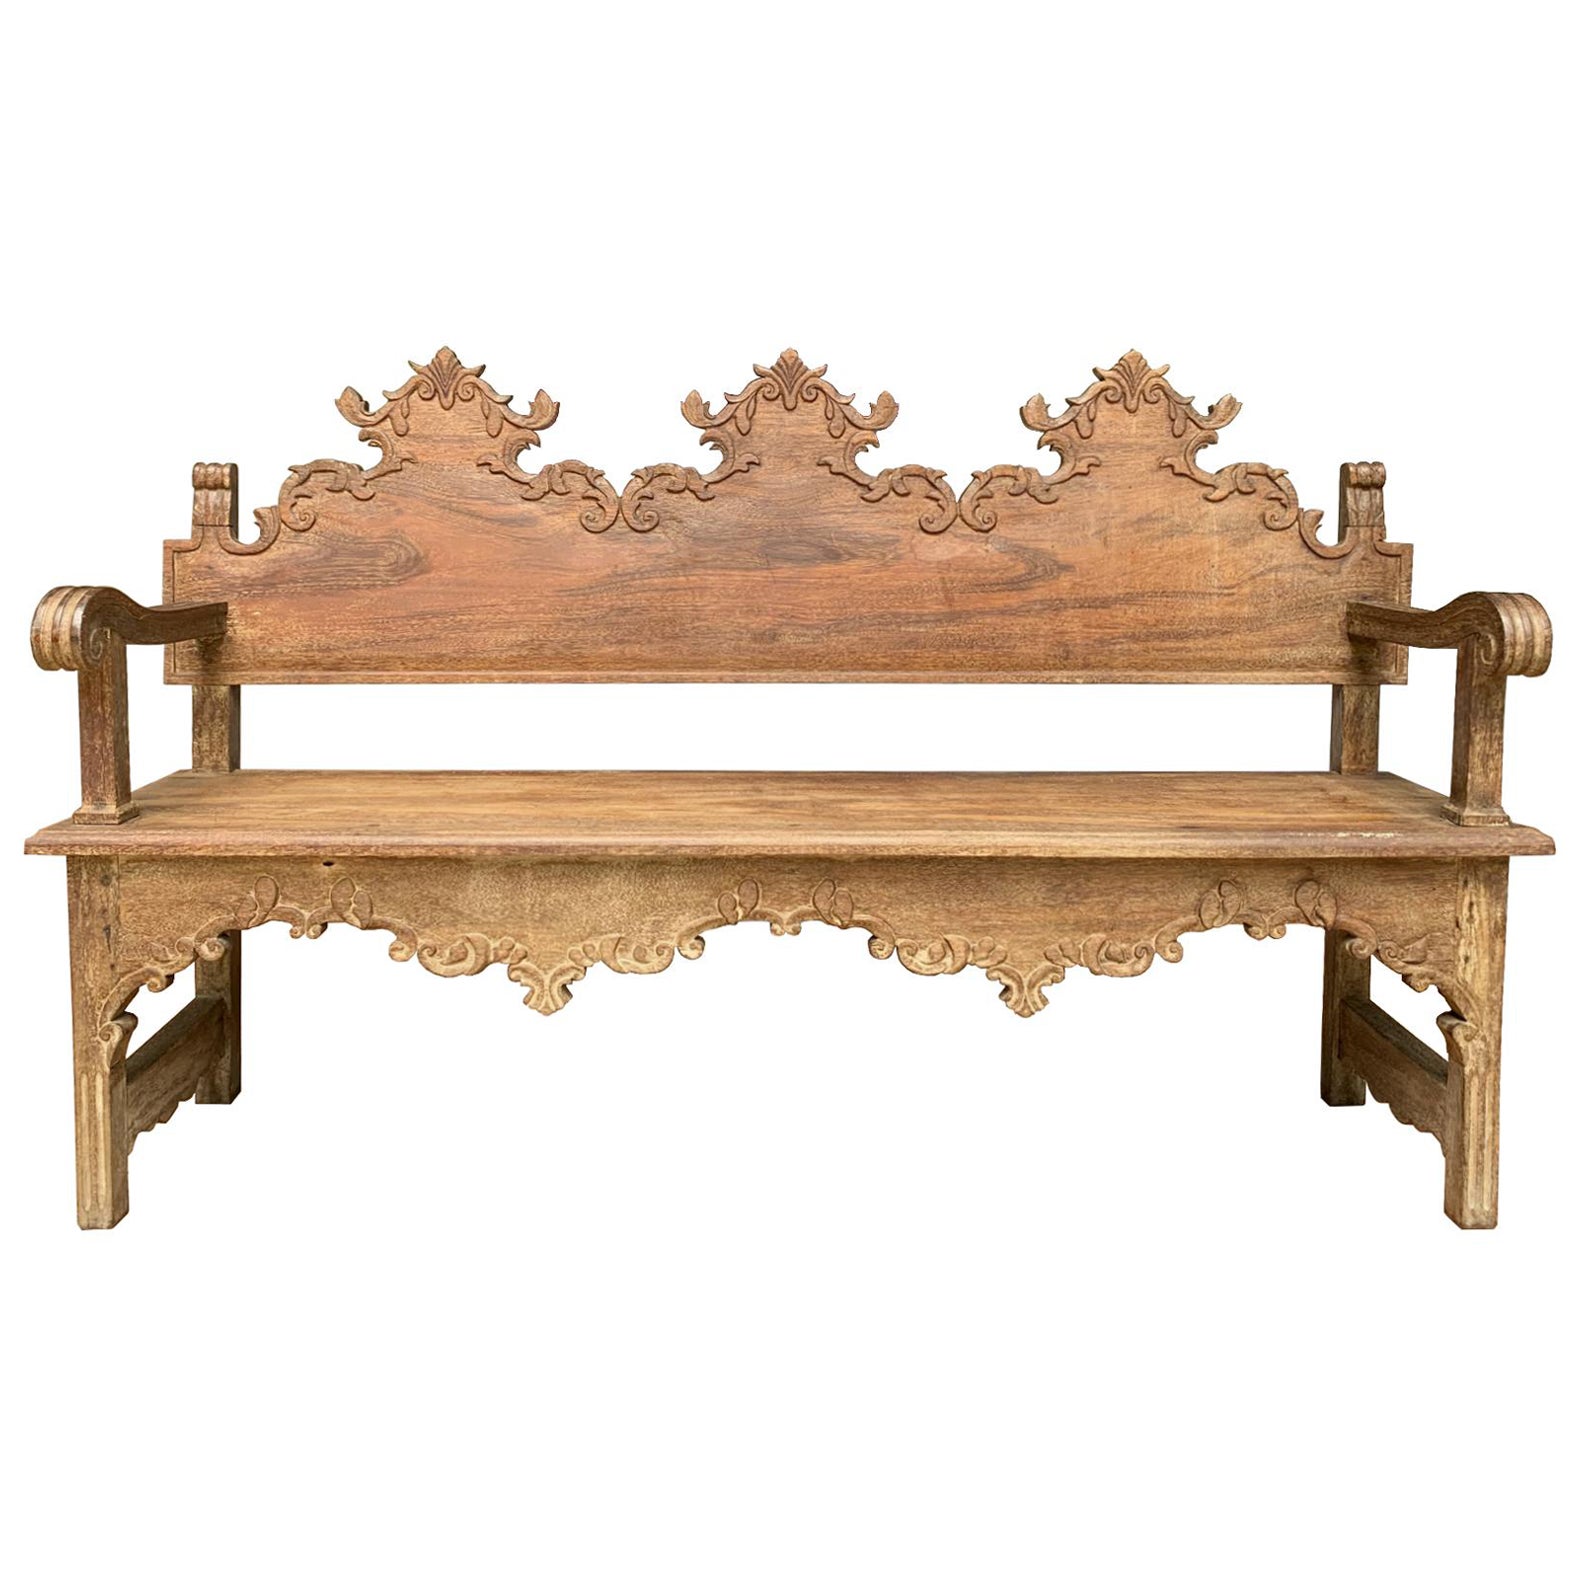 Spanish Colonial Revival Hall Bench - Circa 1930 Sucupira Hand Carved Wood  For Sale